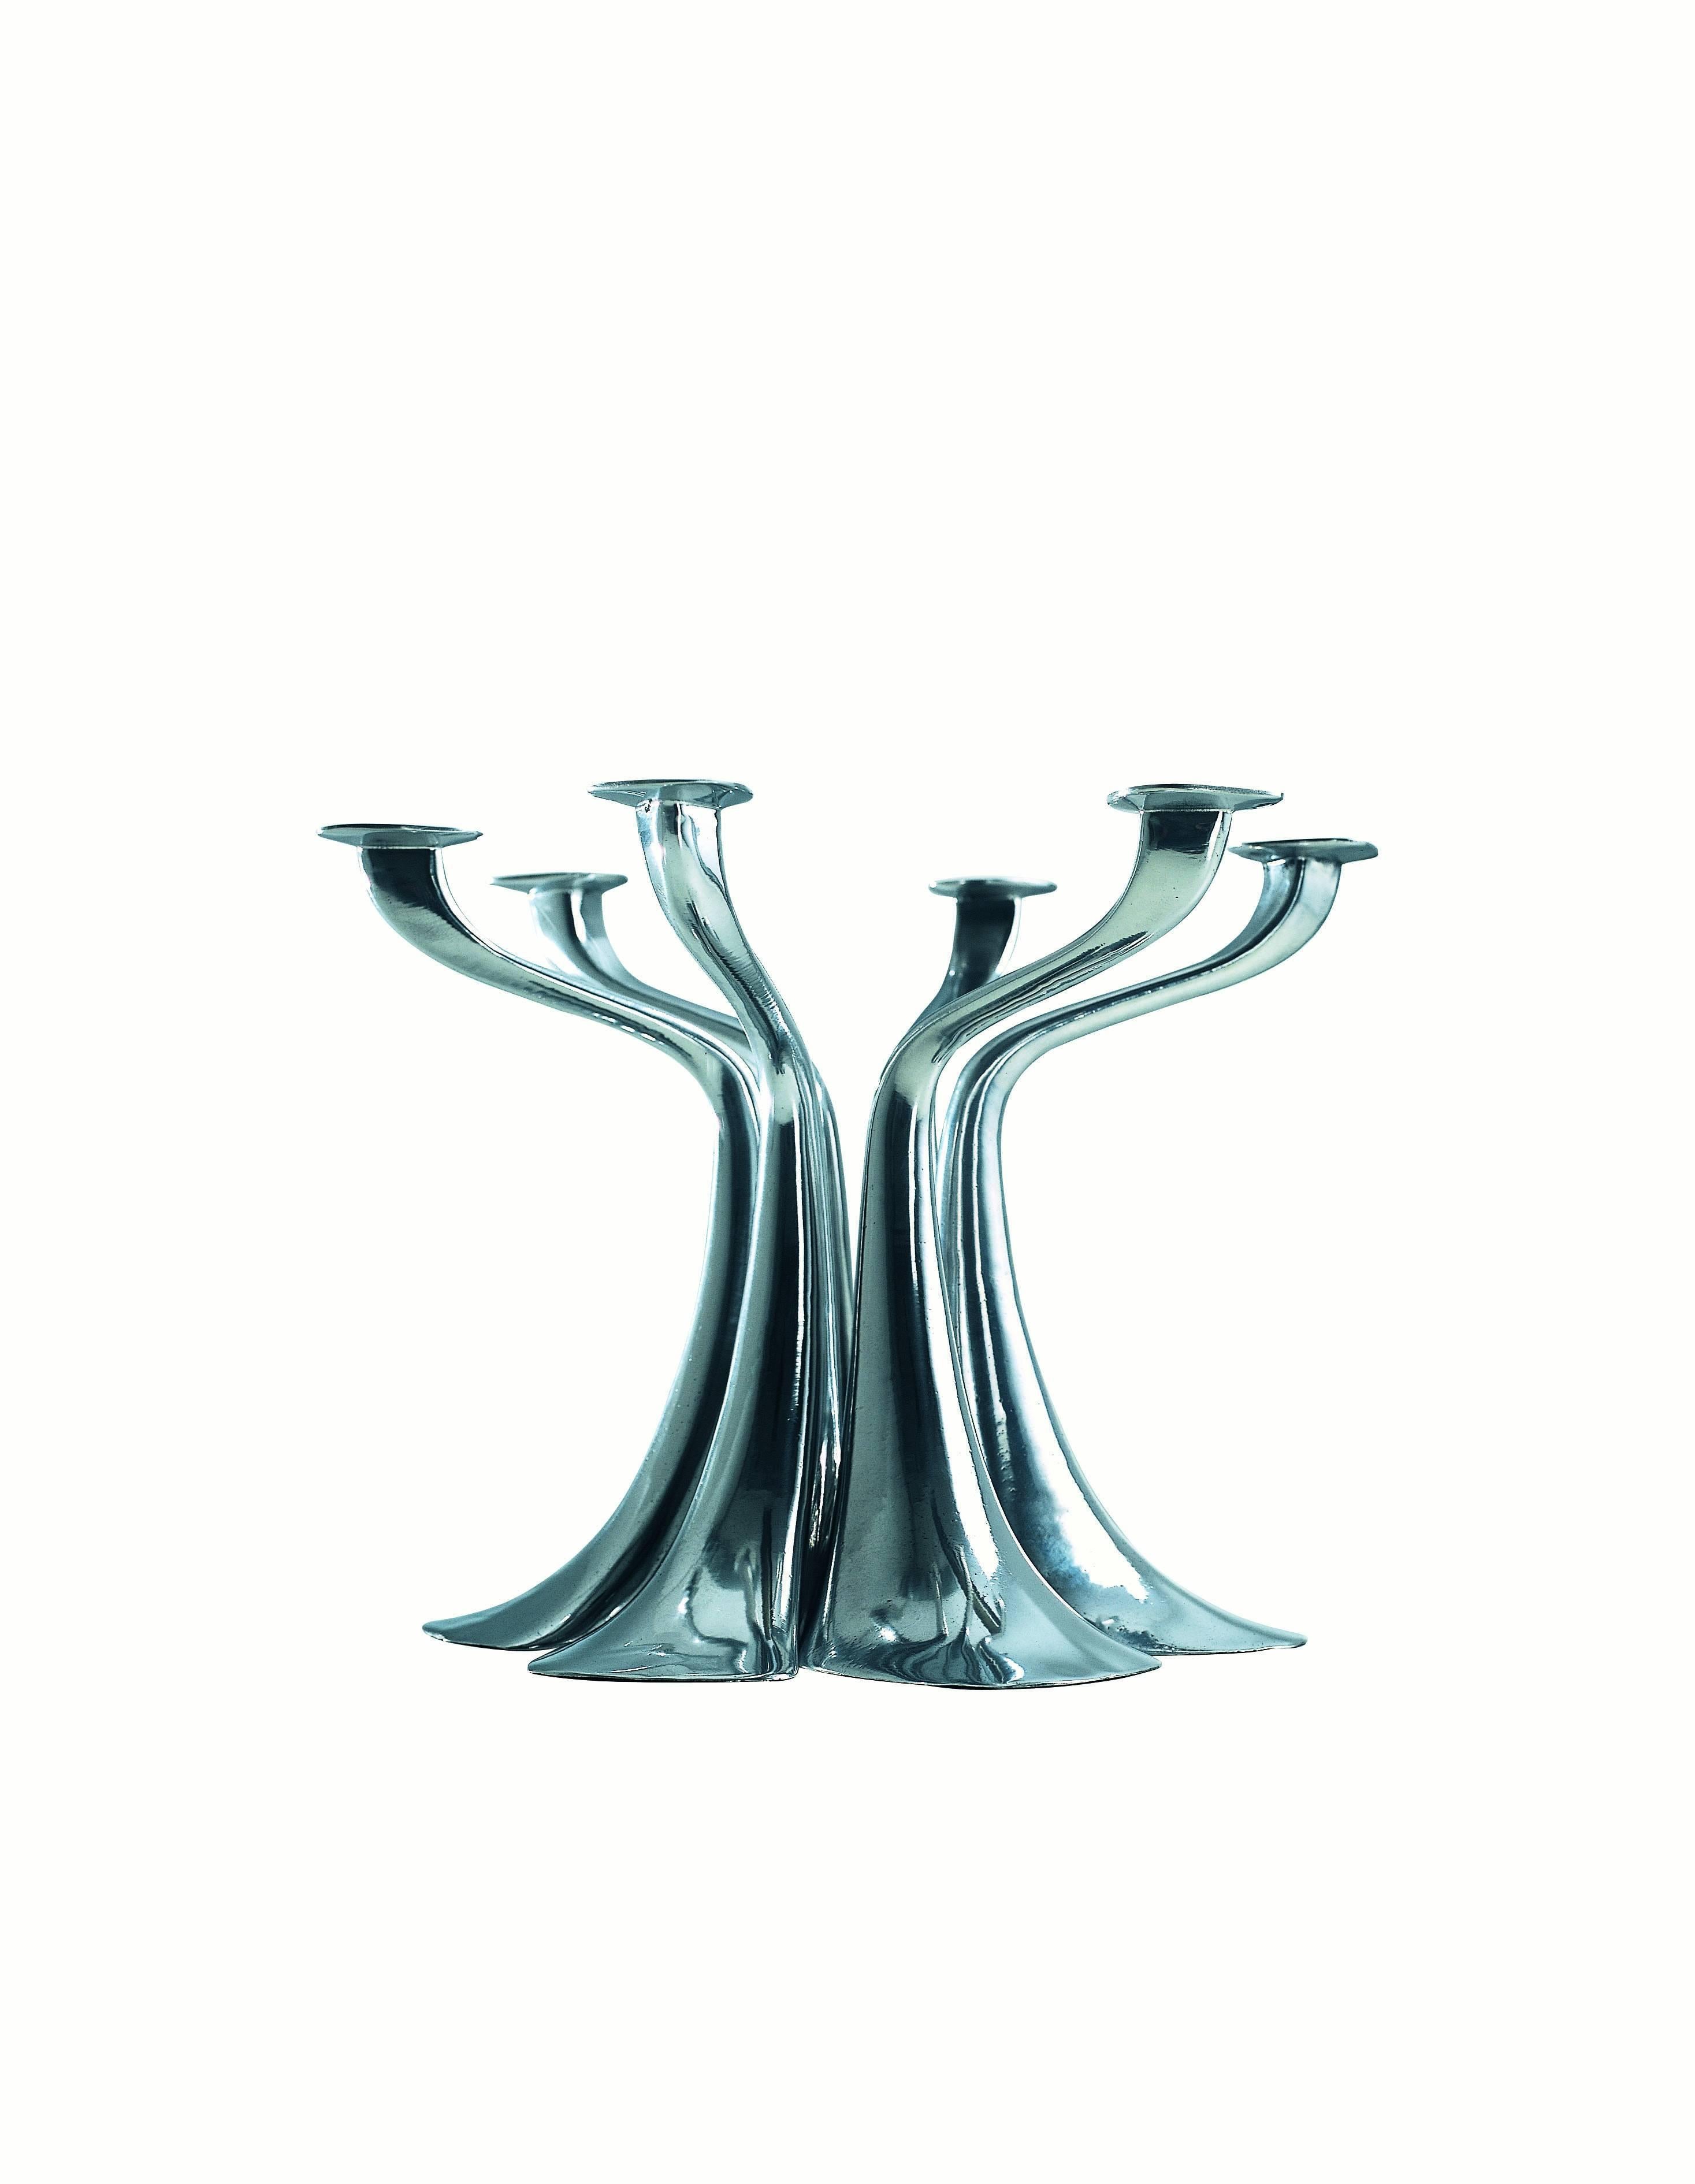 Graceful and charming by itself; romantic in a pair (like a pas-de-deux); mysterious in a group of six, like in a forest: this candleholder by Xavier lust knows how happily spend different lives.

Born in bruges, belgium in 1969, he got his degree